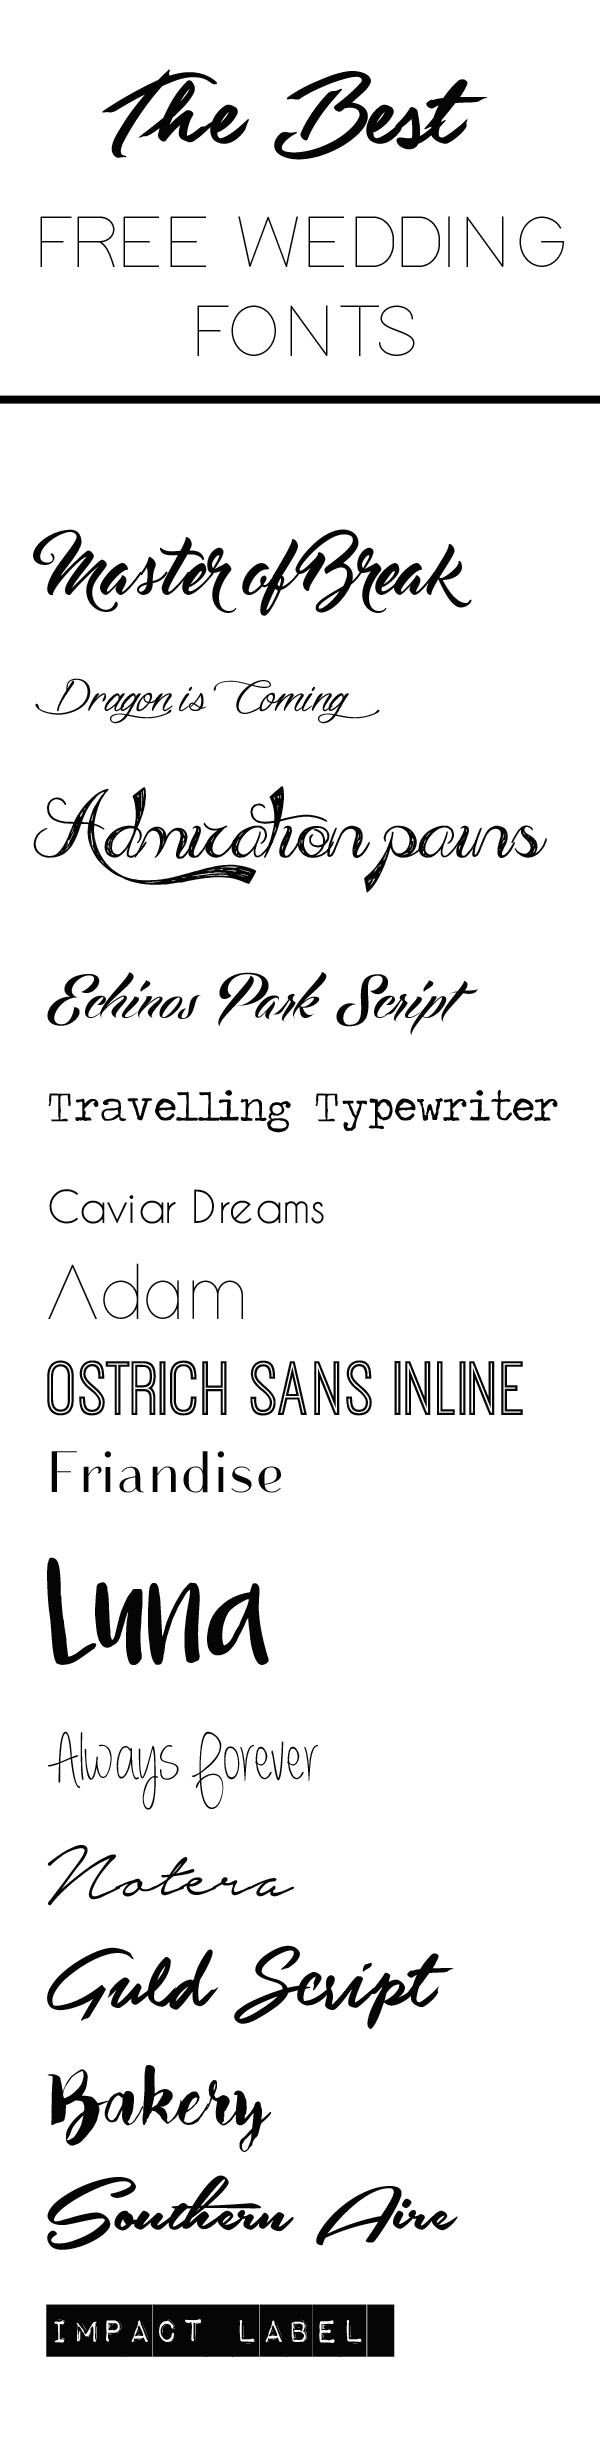 The Best Free Wedding Fonts - free download - put together by @theweddingomd